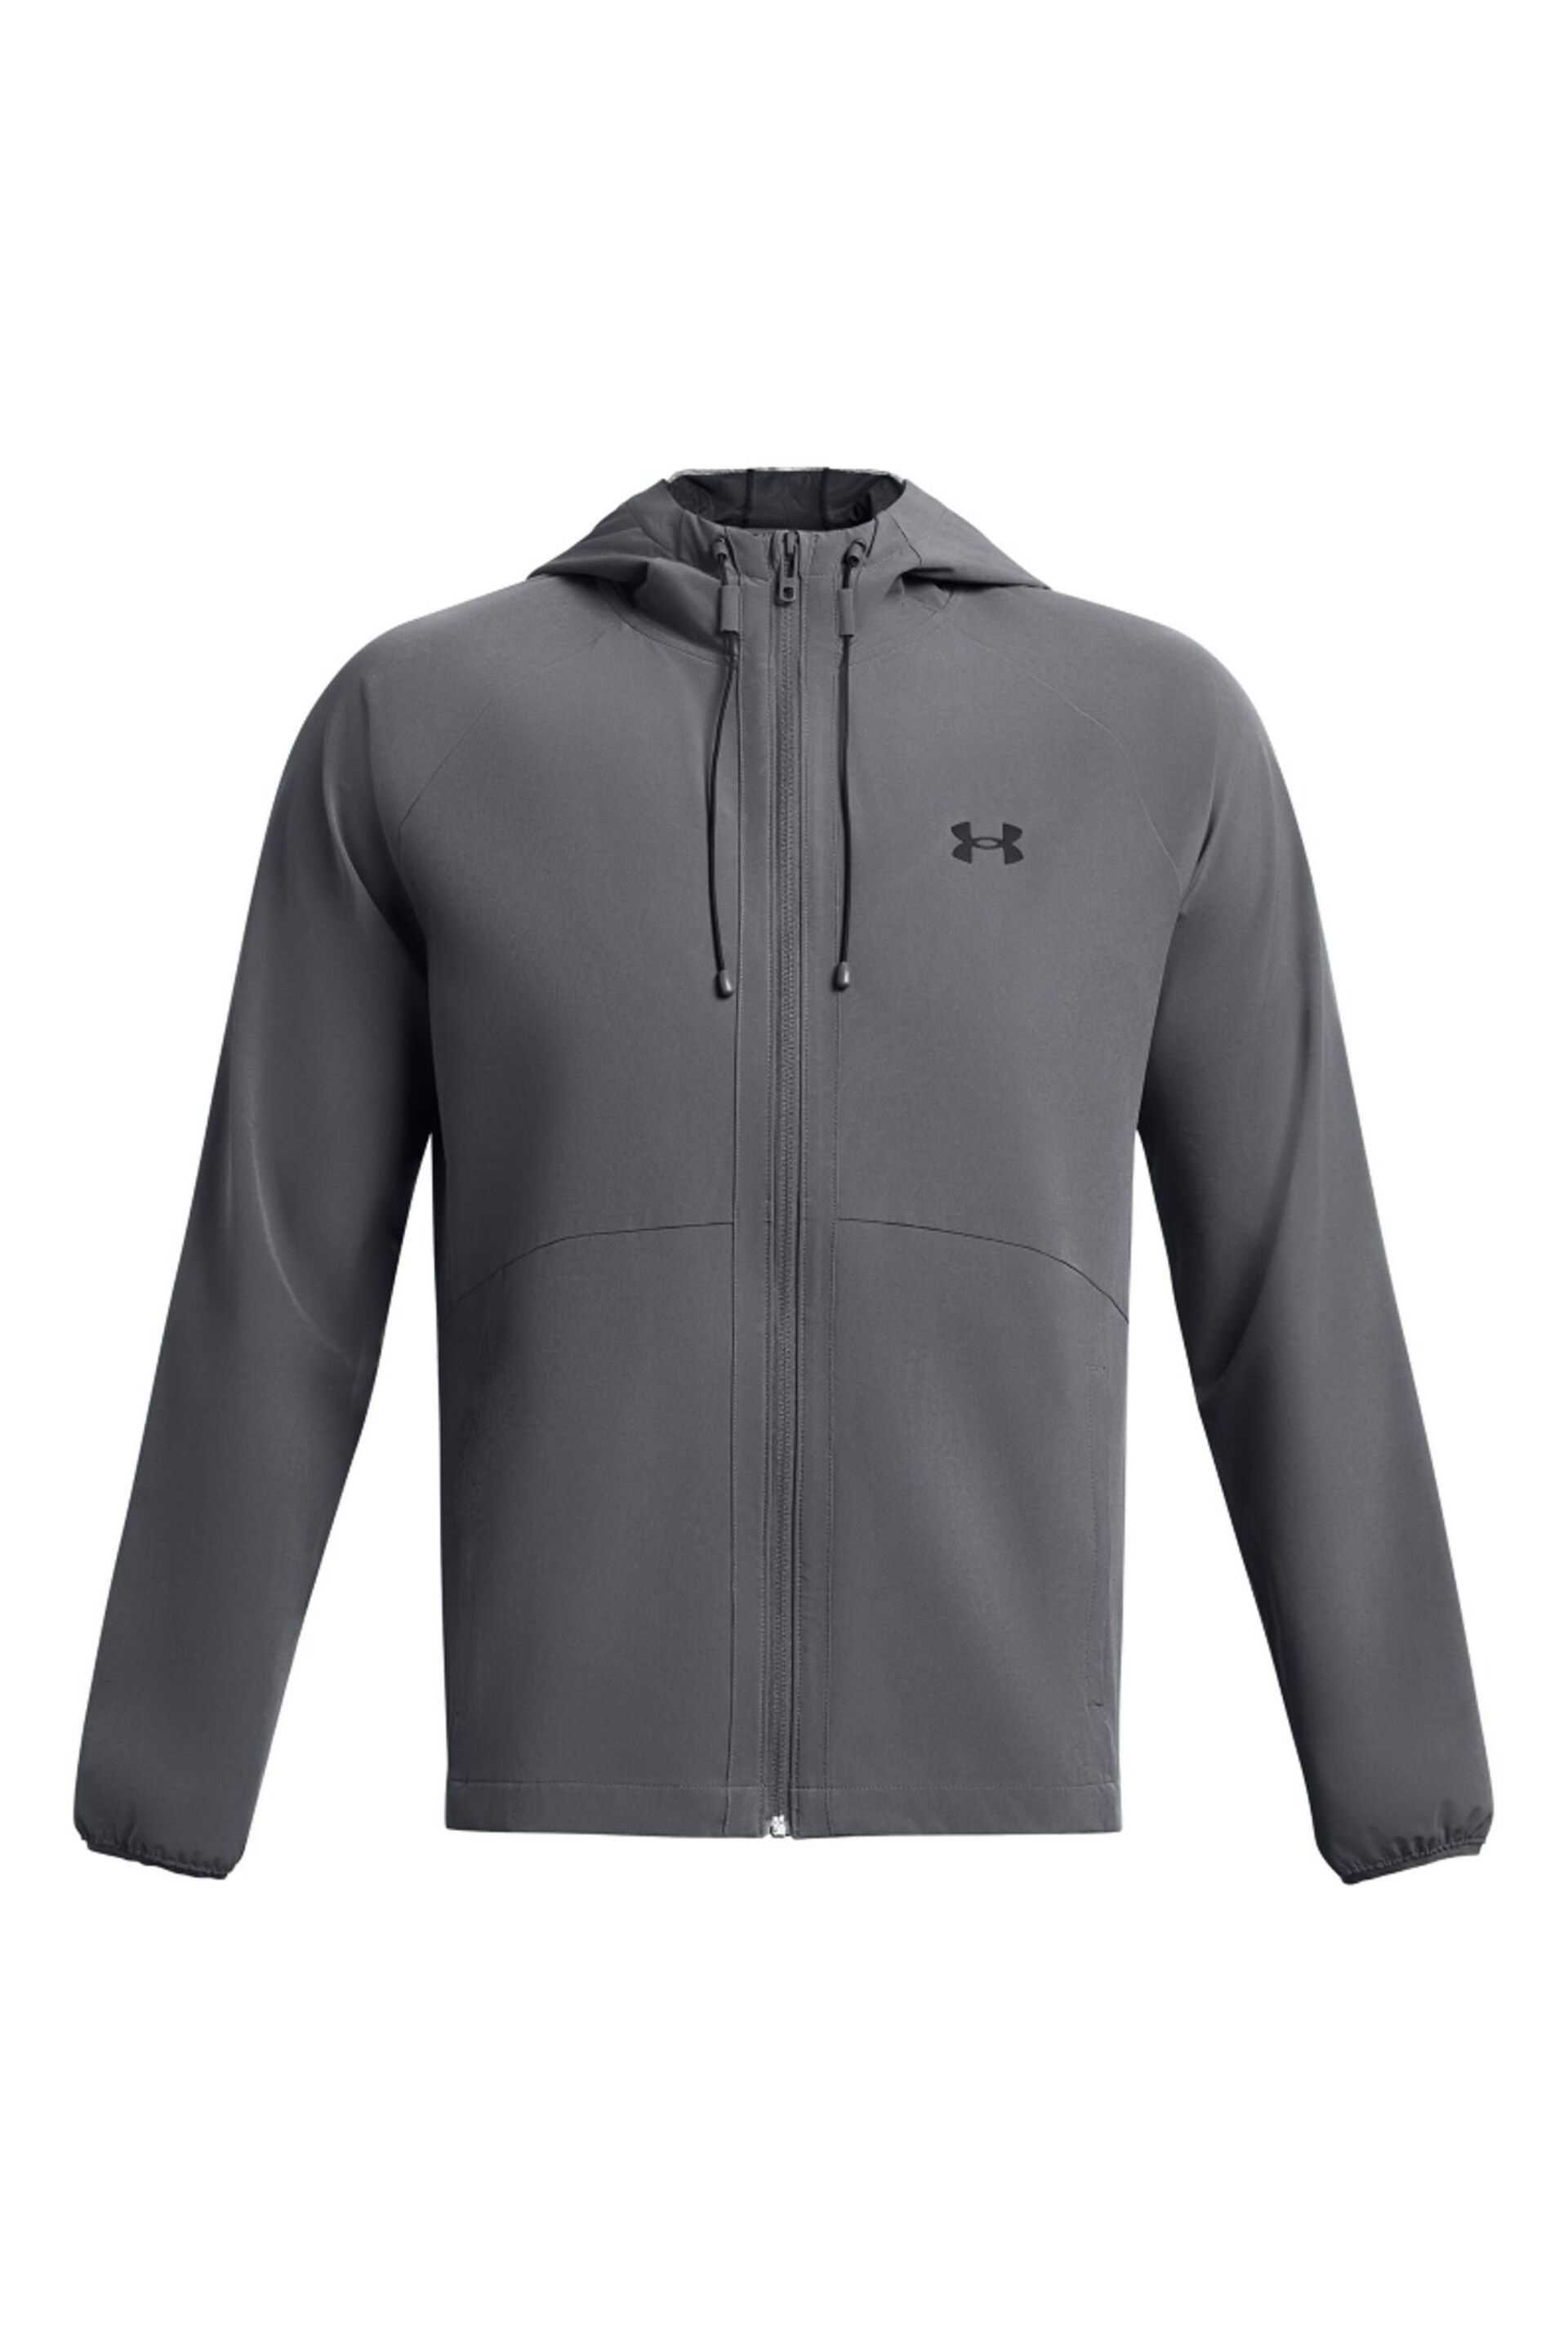 Under Armour Grey Stretch Woven Windbreaker - Image 4 of 6